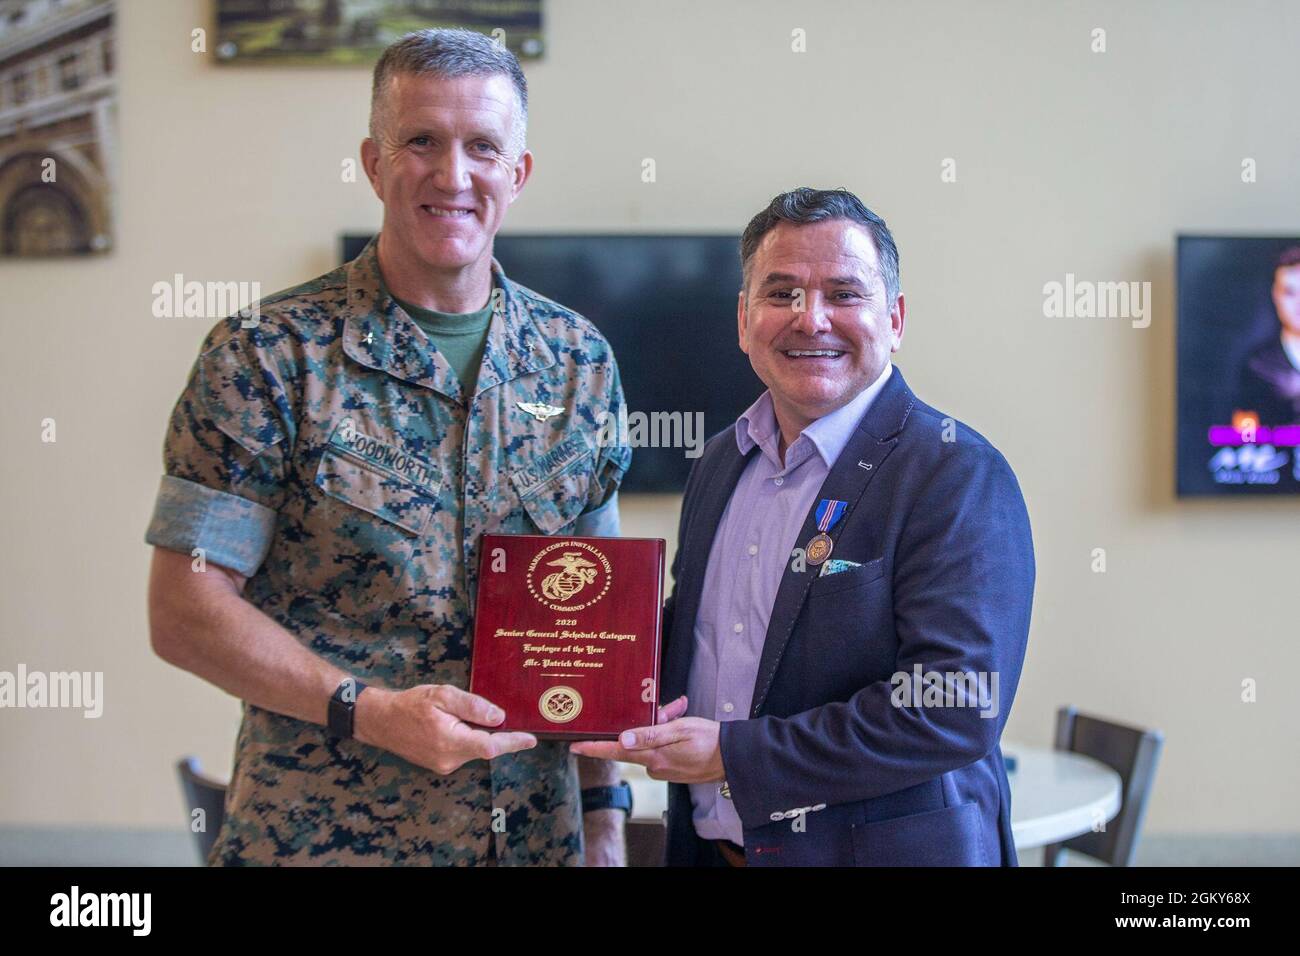 U.S. Marine Brig. Gen. Jason Woodworth, the commanding general for Marine Corps Installations West, Marine Corps Base Camp Pendleton, poses with Patrick Grosso, the food service director for G-4 Logistics, MCI-West, after presenting him the Commendation for Meritorious Civilian Service Award and the Marine Corps Installations Command Senior General Schedule Employee of the Year Award, at the 22 Area Mess Hall on Camp Pendleton California, July 26, 2021. Grosso was awarded the employee of the year award in response to his leadership and professionalism during the COVID-19 pandemic. Stock Photo